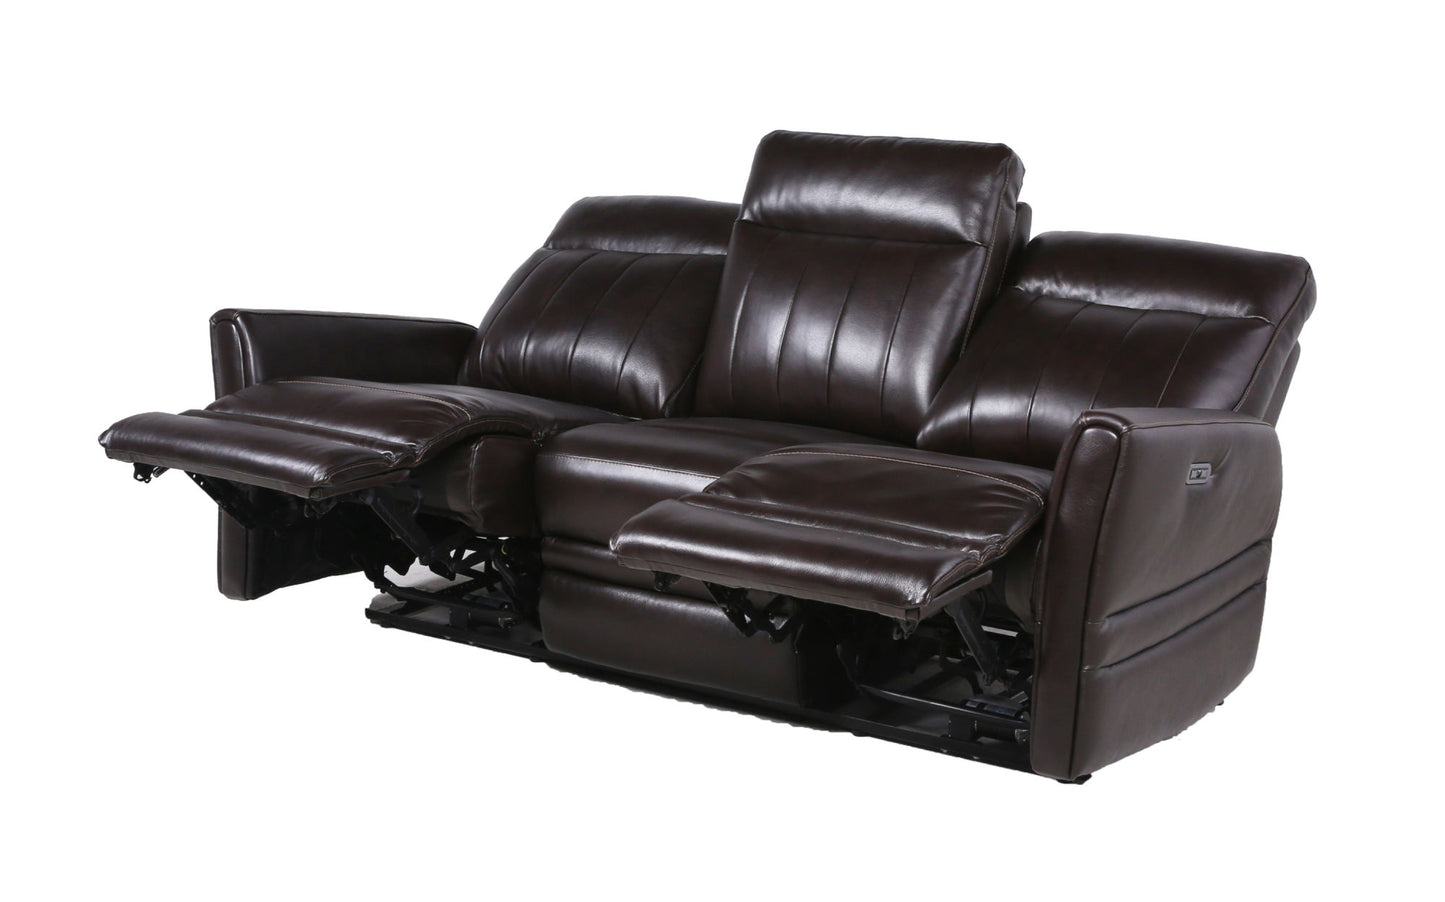 Dark Brown Top-Grain Leather Sofa with Power Leg Rest and Articulating Headrest